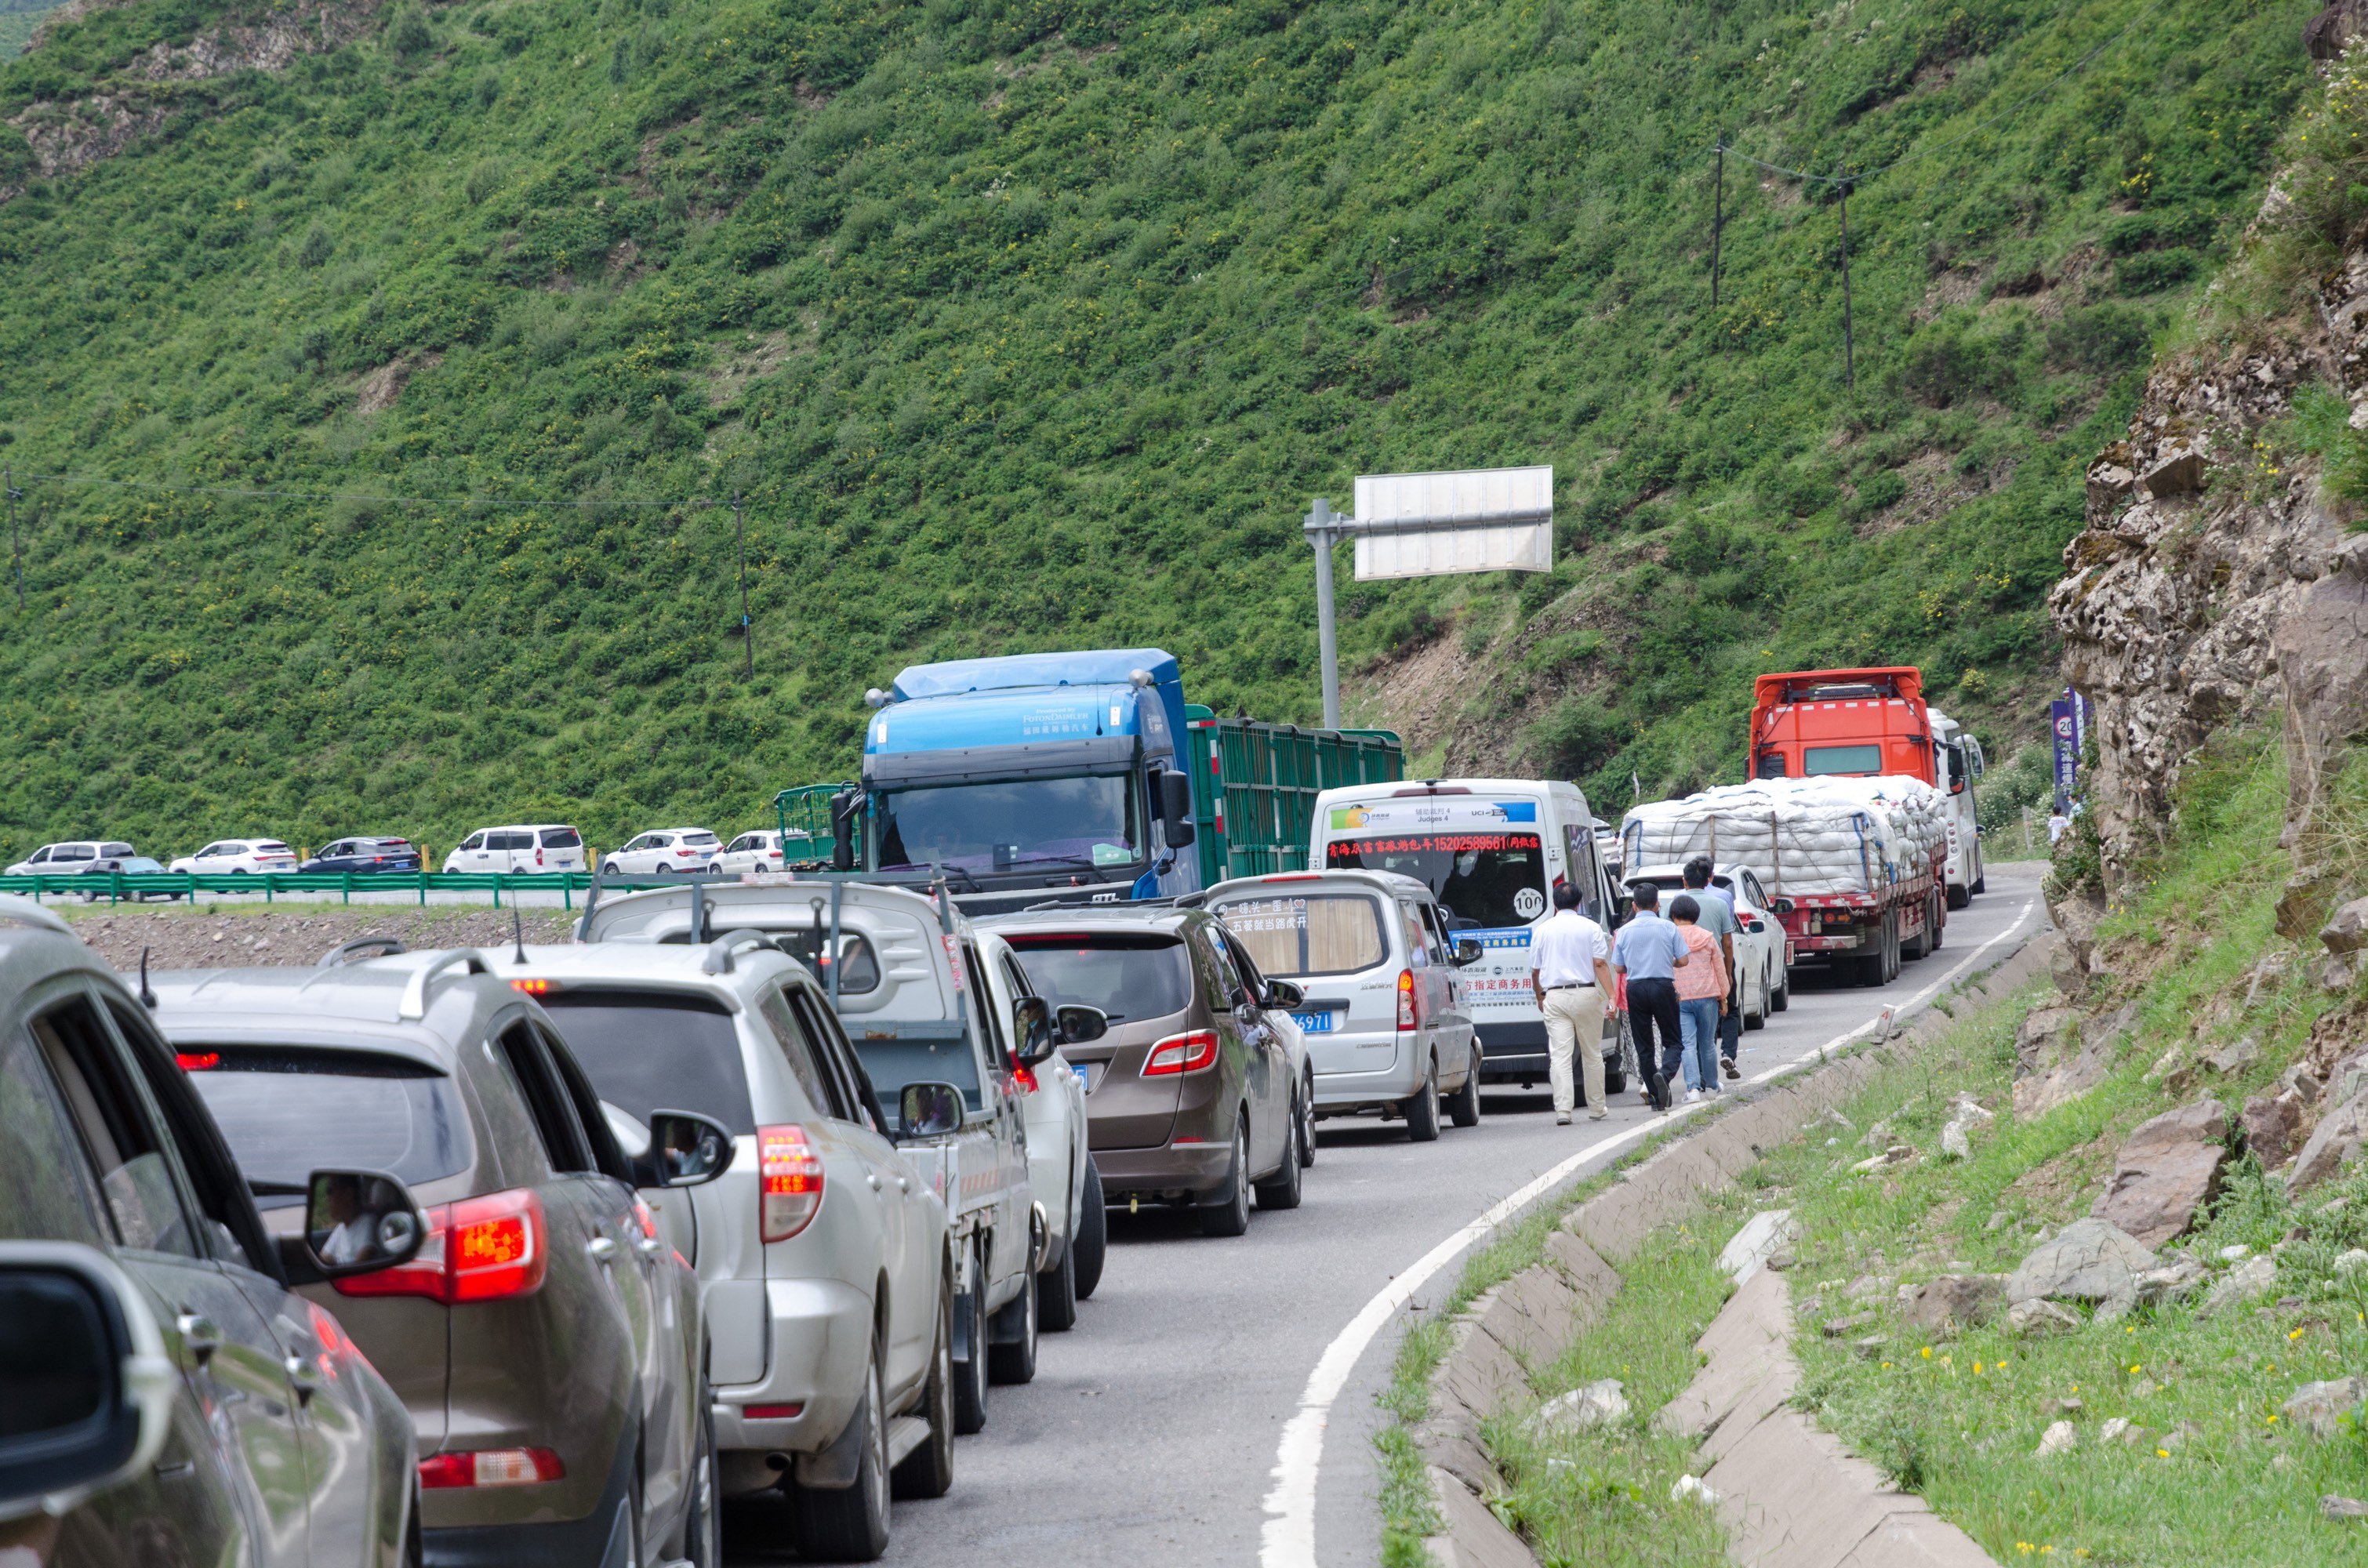 Traffic jam caused by nucleic acid testing and health code checks